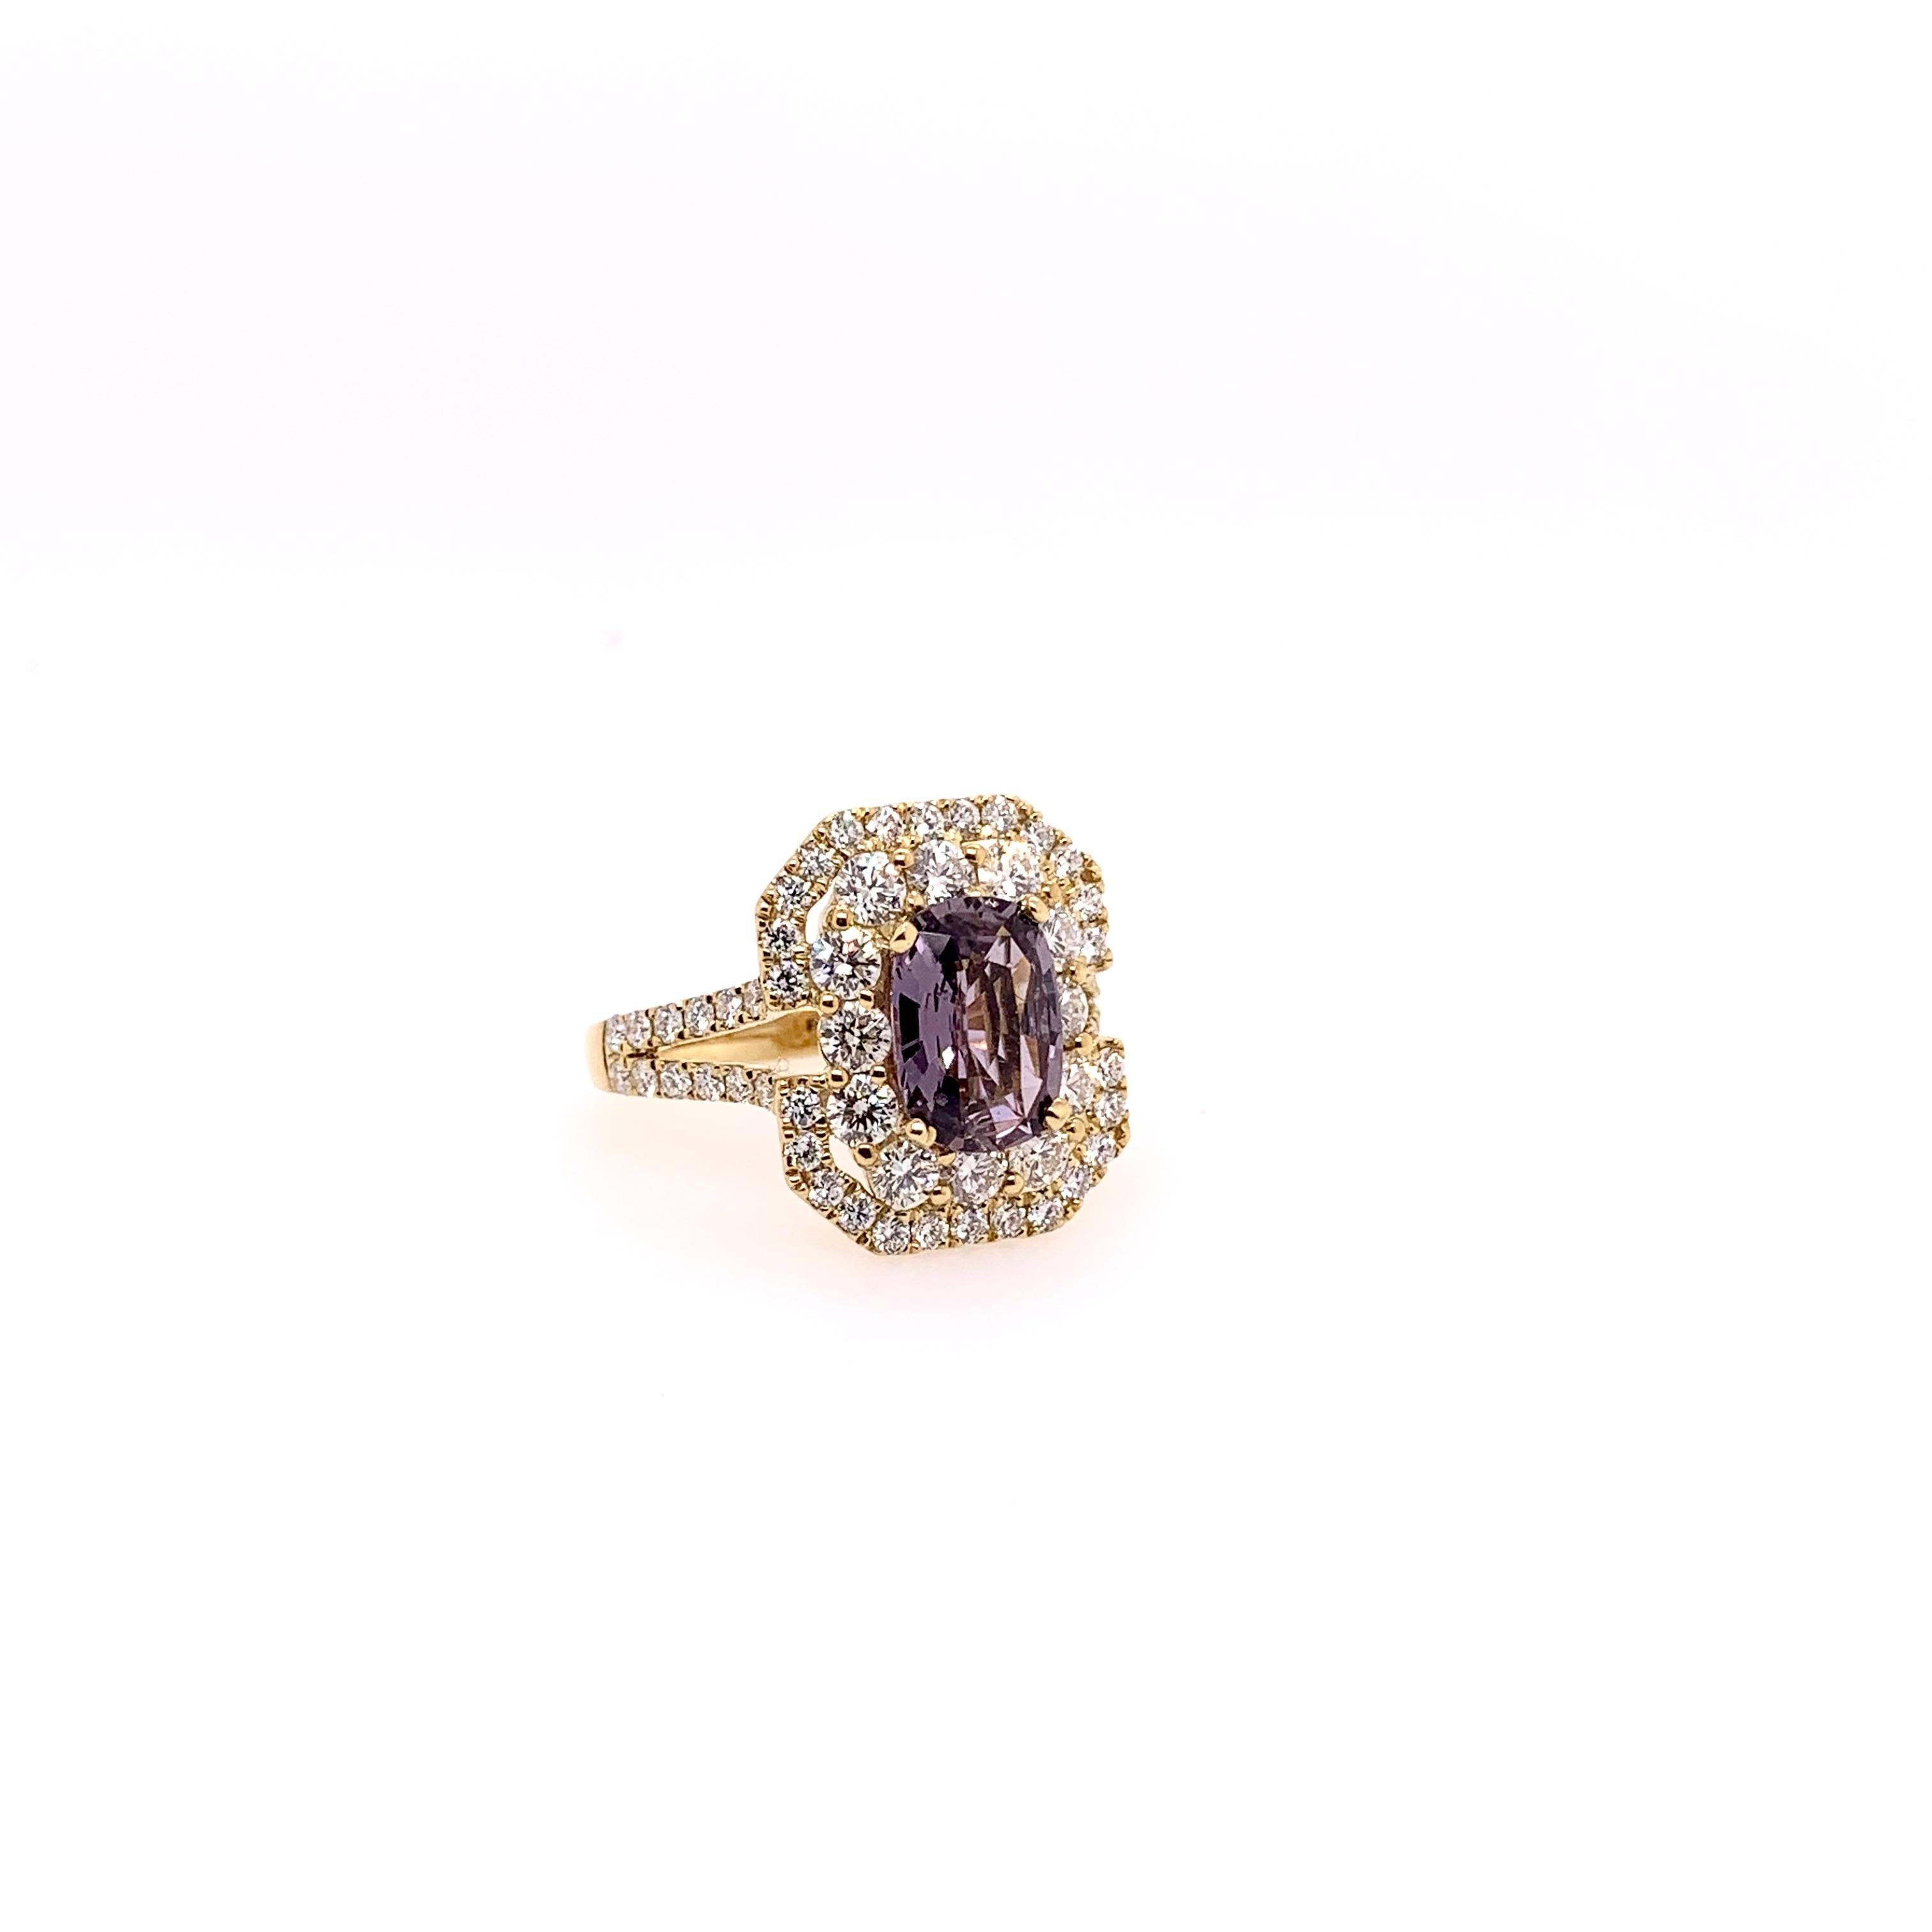 This unique ring has a very unusual center stone.  It is a GIA certified, unheated natural purple sapphire that weighs 2.06 carats.  The soft purple hue is complemented by the 1.58 carats of round brilliant diamonds and set in the 18k yellow gold. 